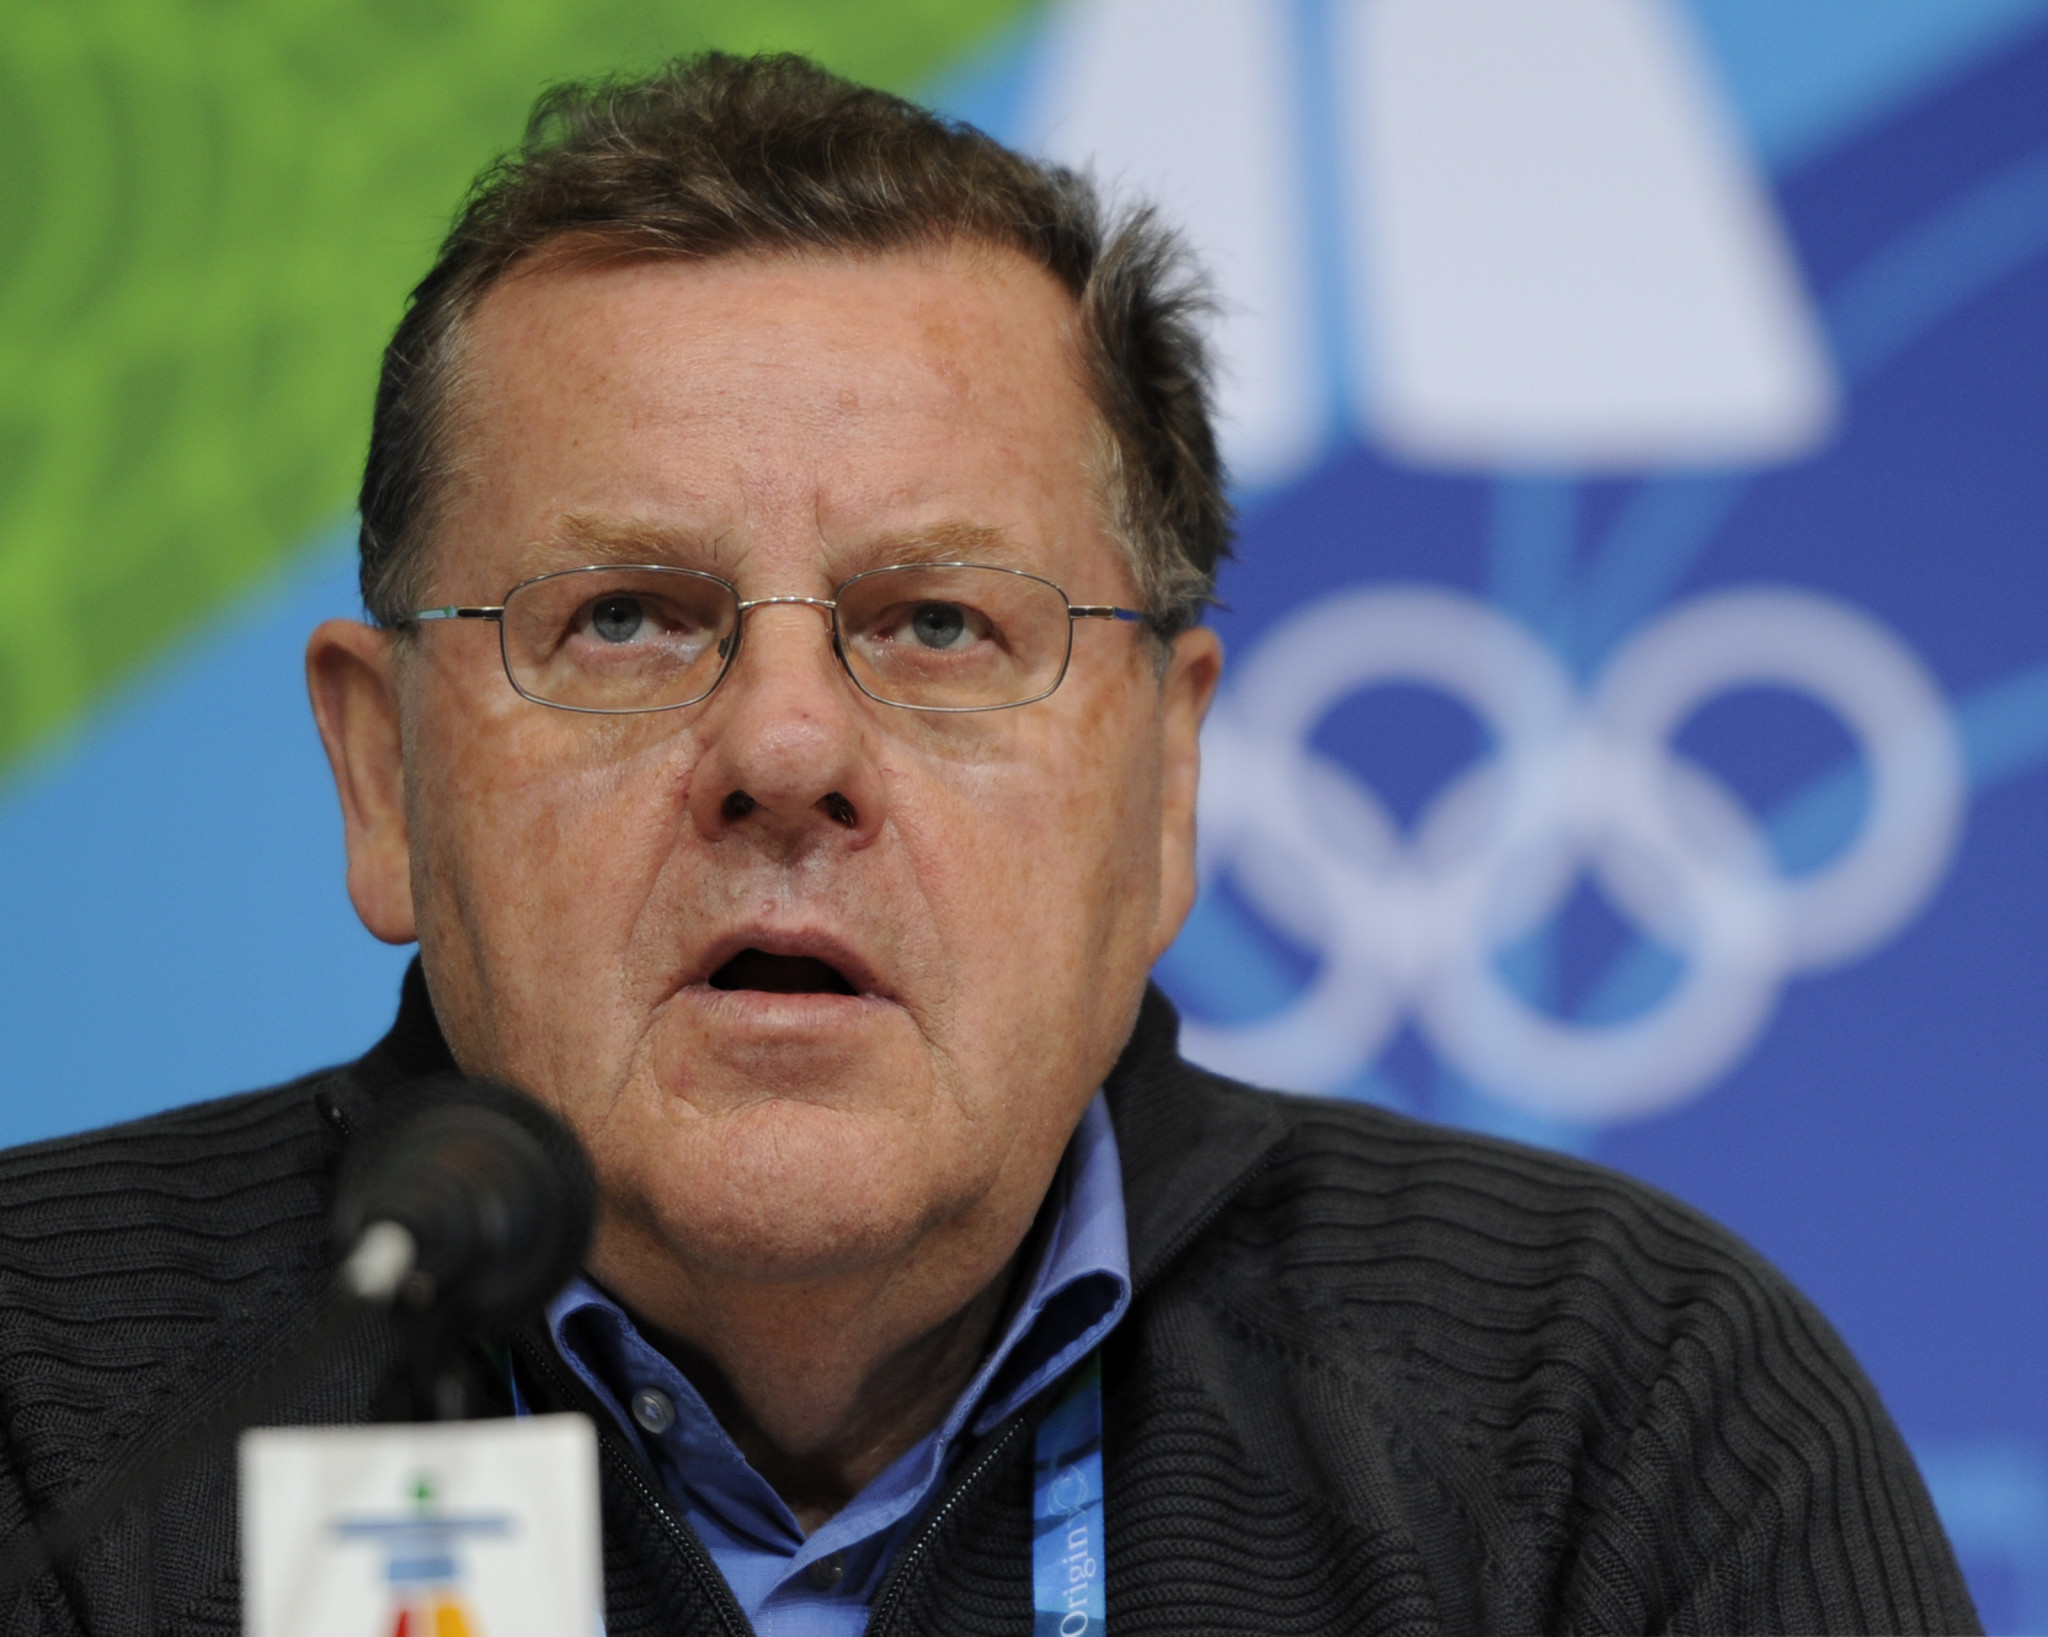 FIL President Josef Fendt has become the latest winter sports official to speak out against a blanket ban of Russian athletes at Pyeongchang 2018 ©Getty Images